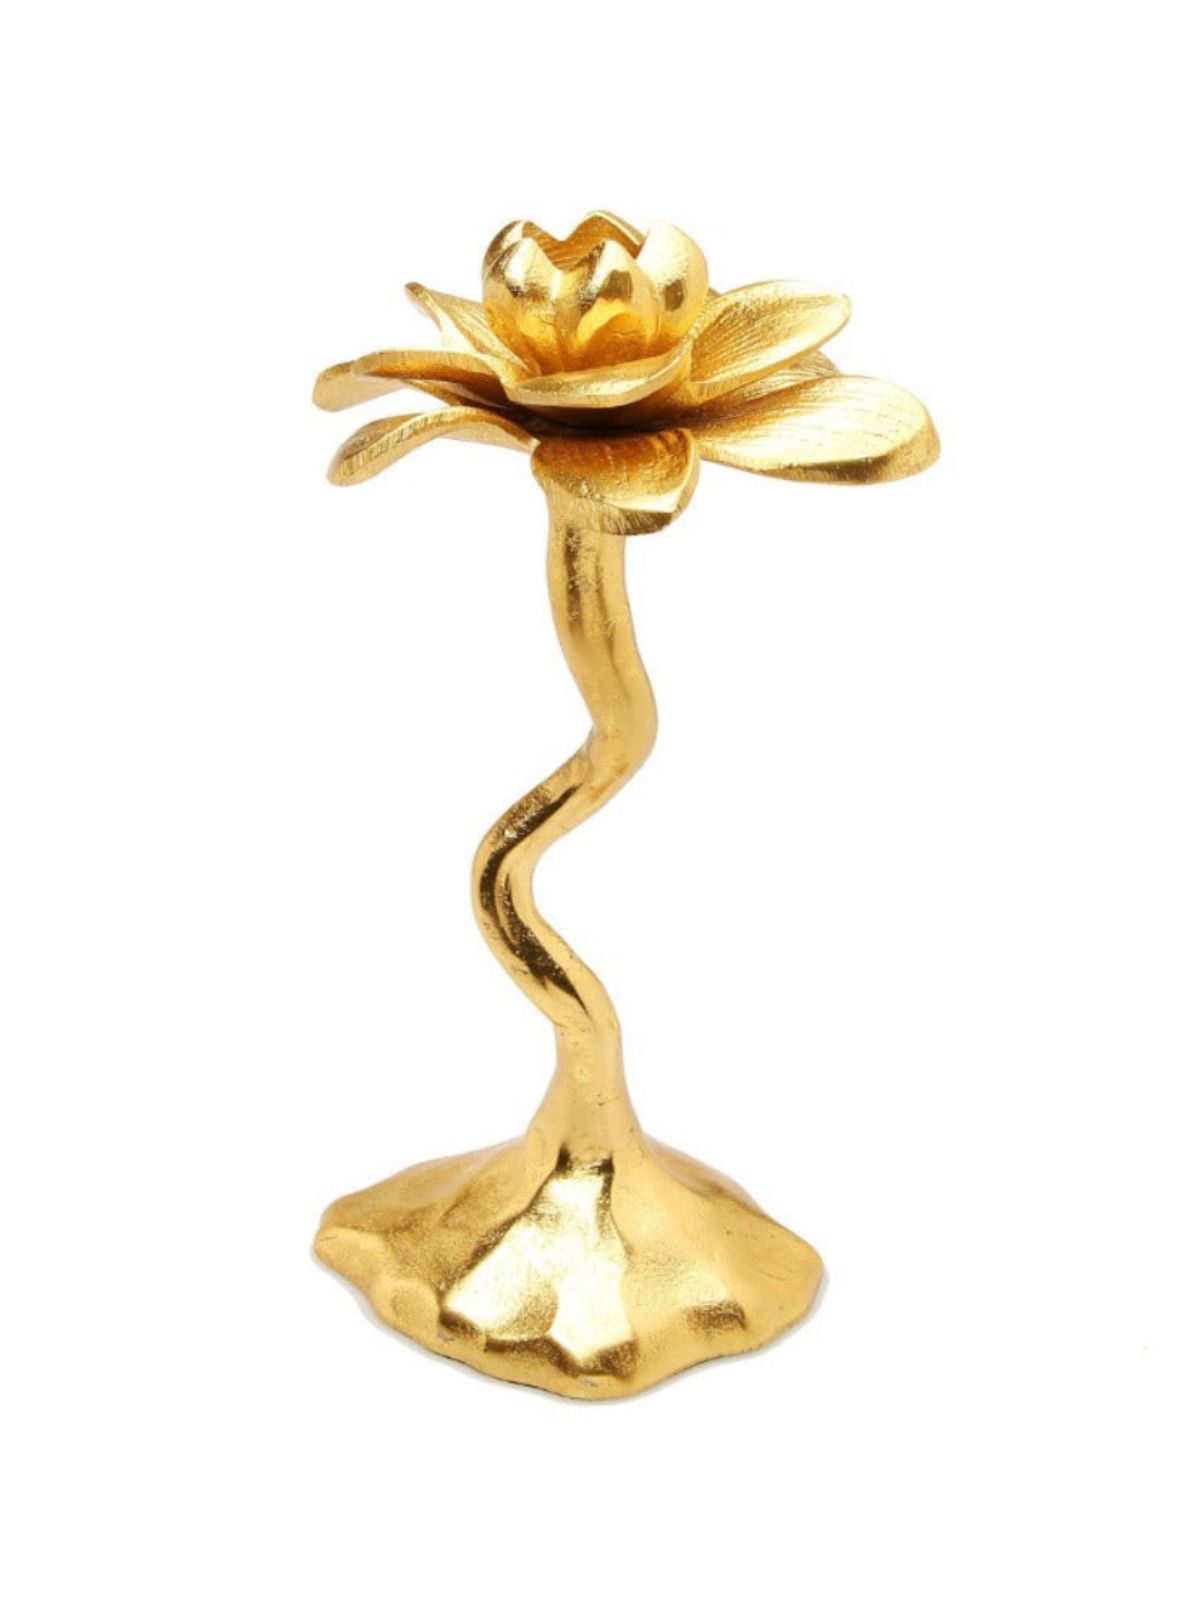 11.5H Gold Metal Candle Holder With Flower Shape Design. Sold by KYA Home Decor. 